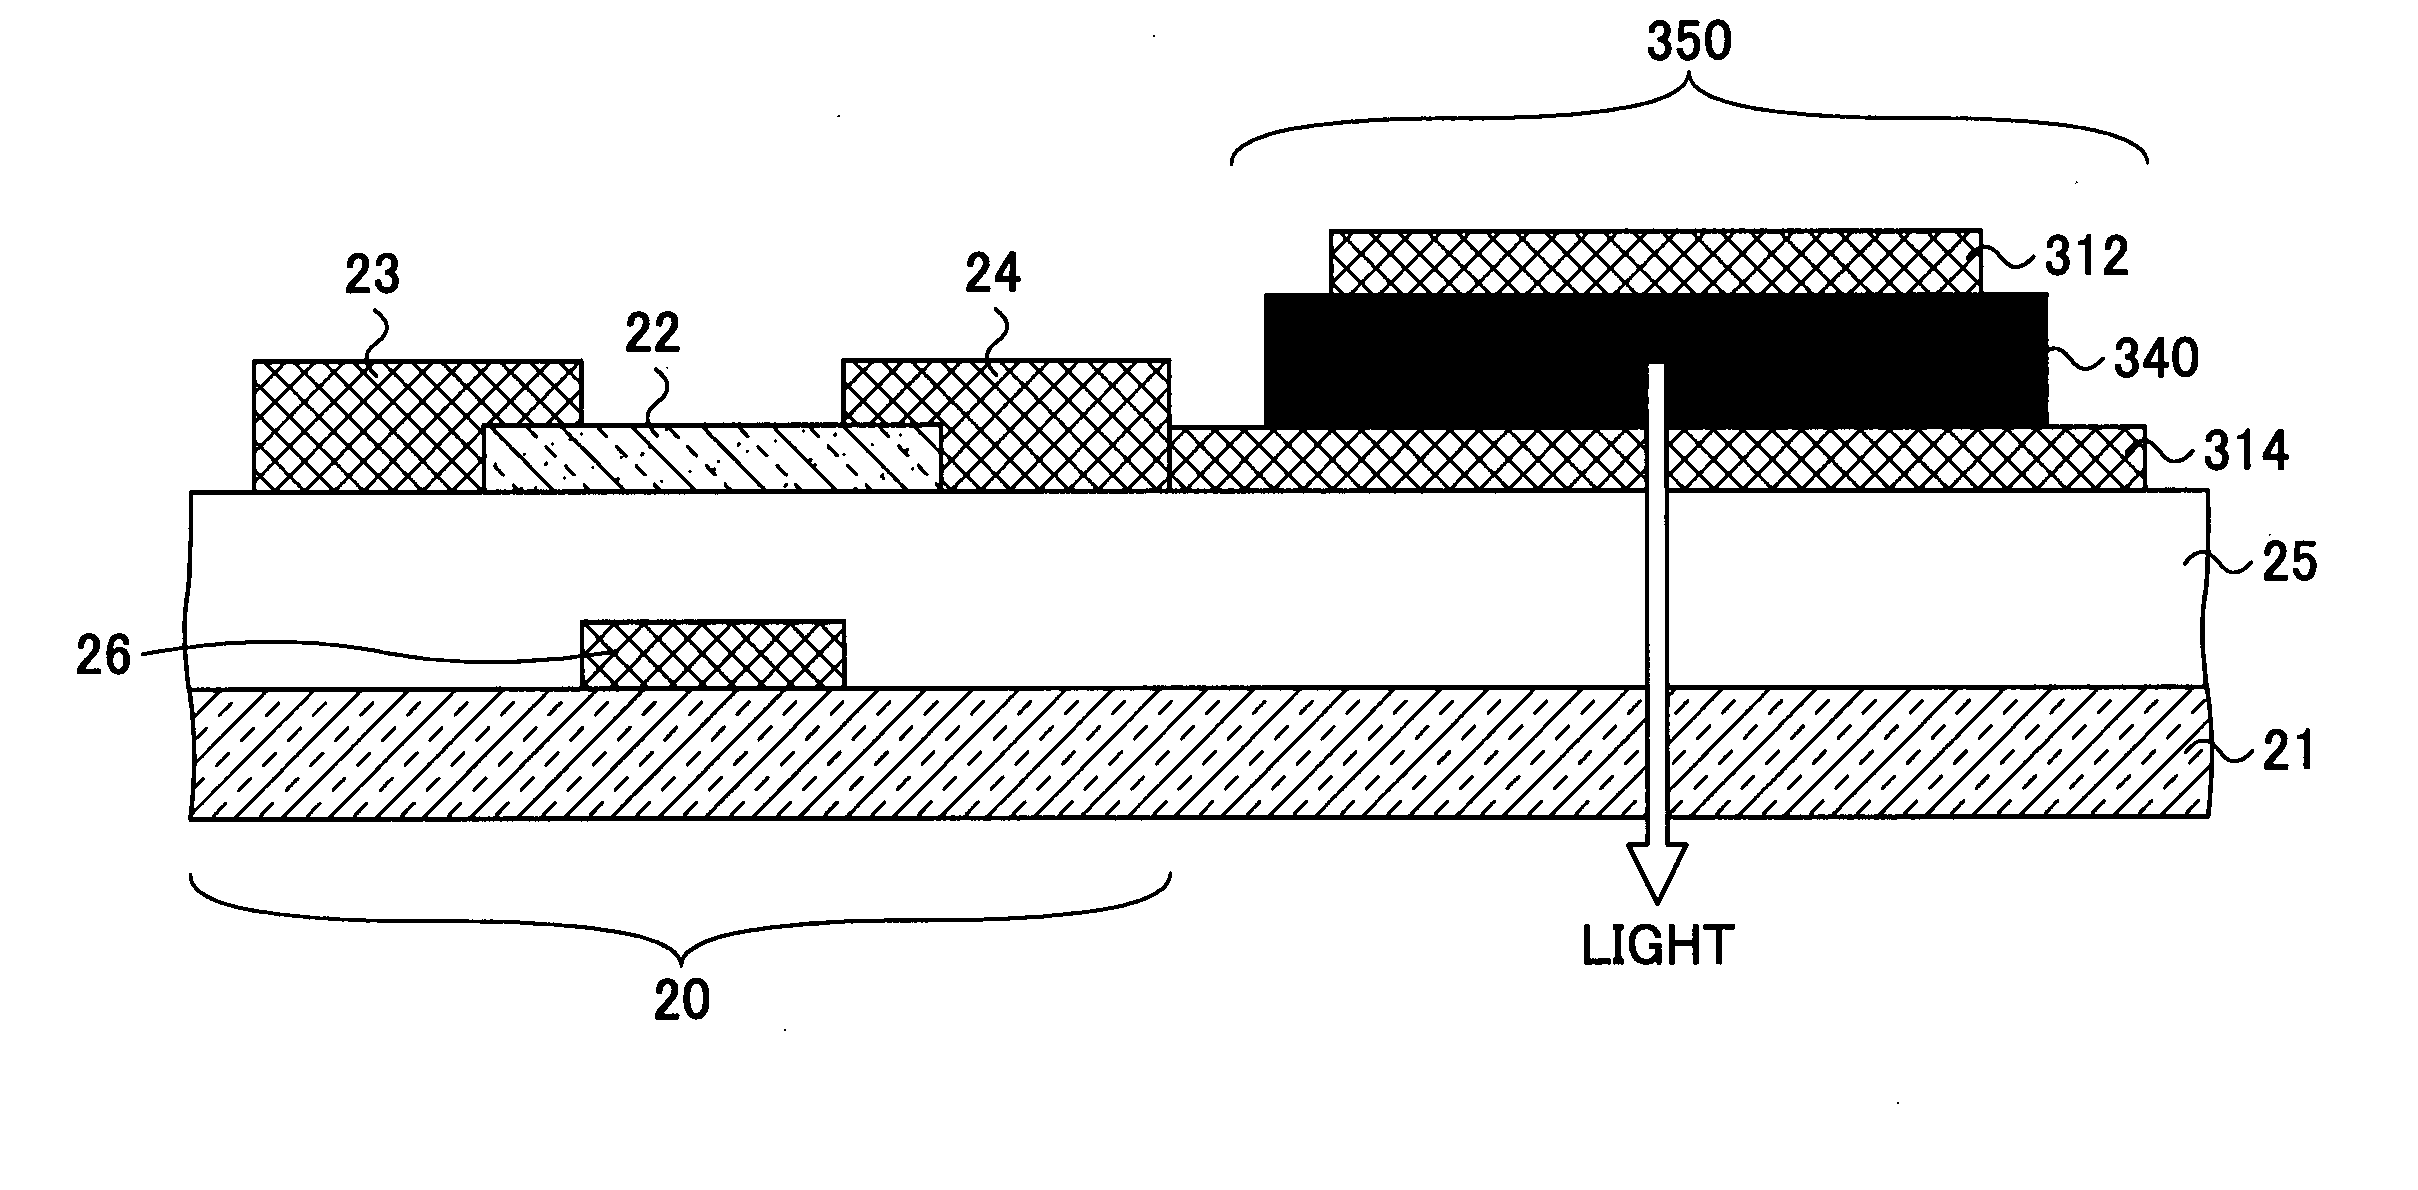 Field effect transistor, display element, image display device, and system